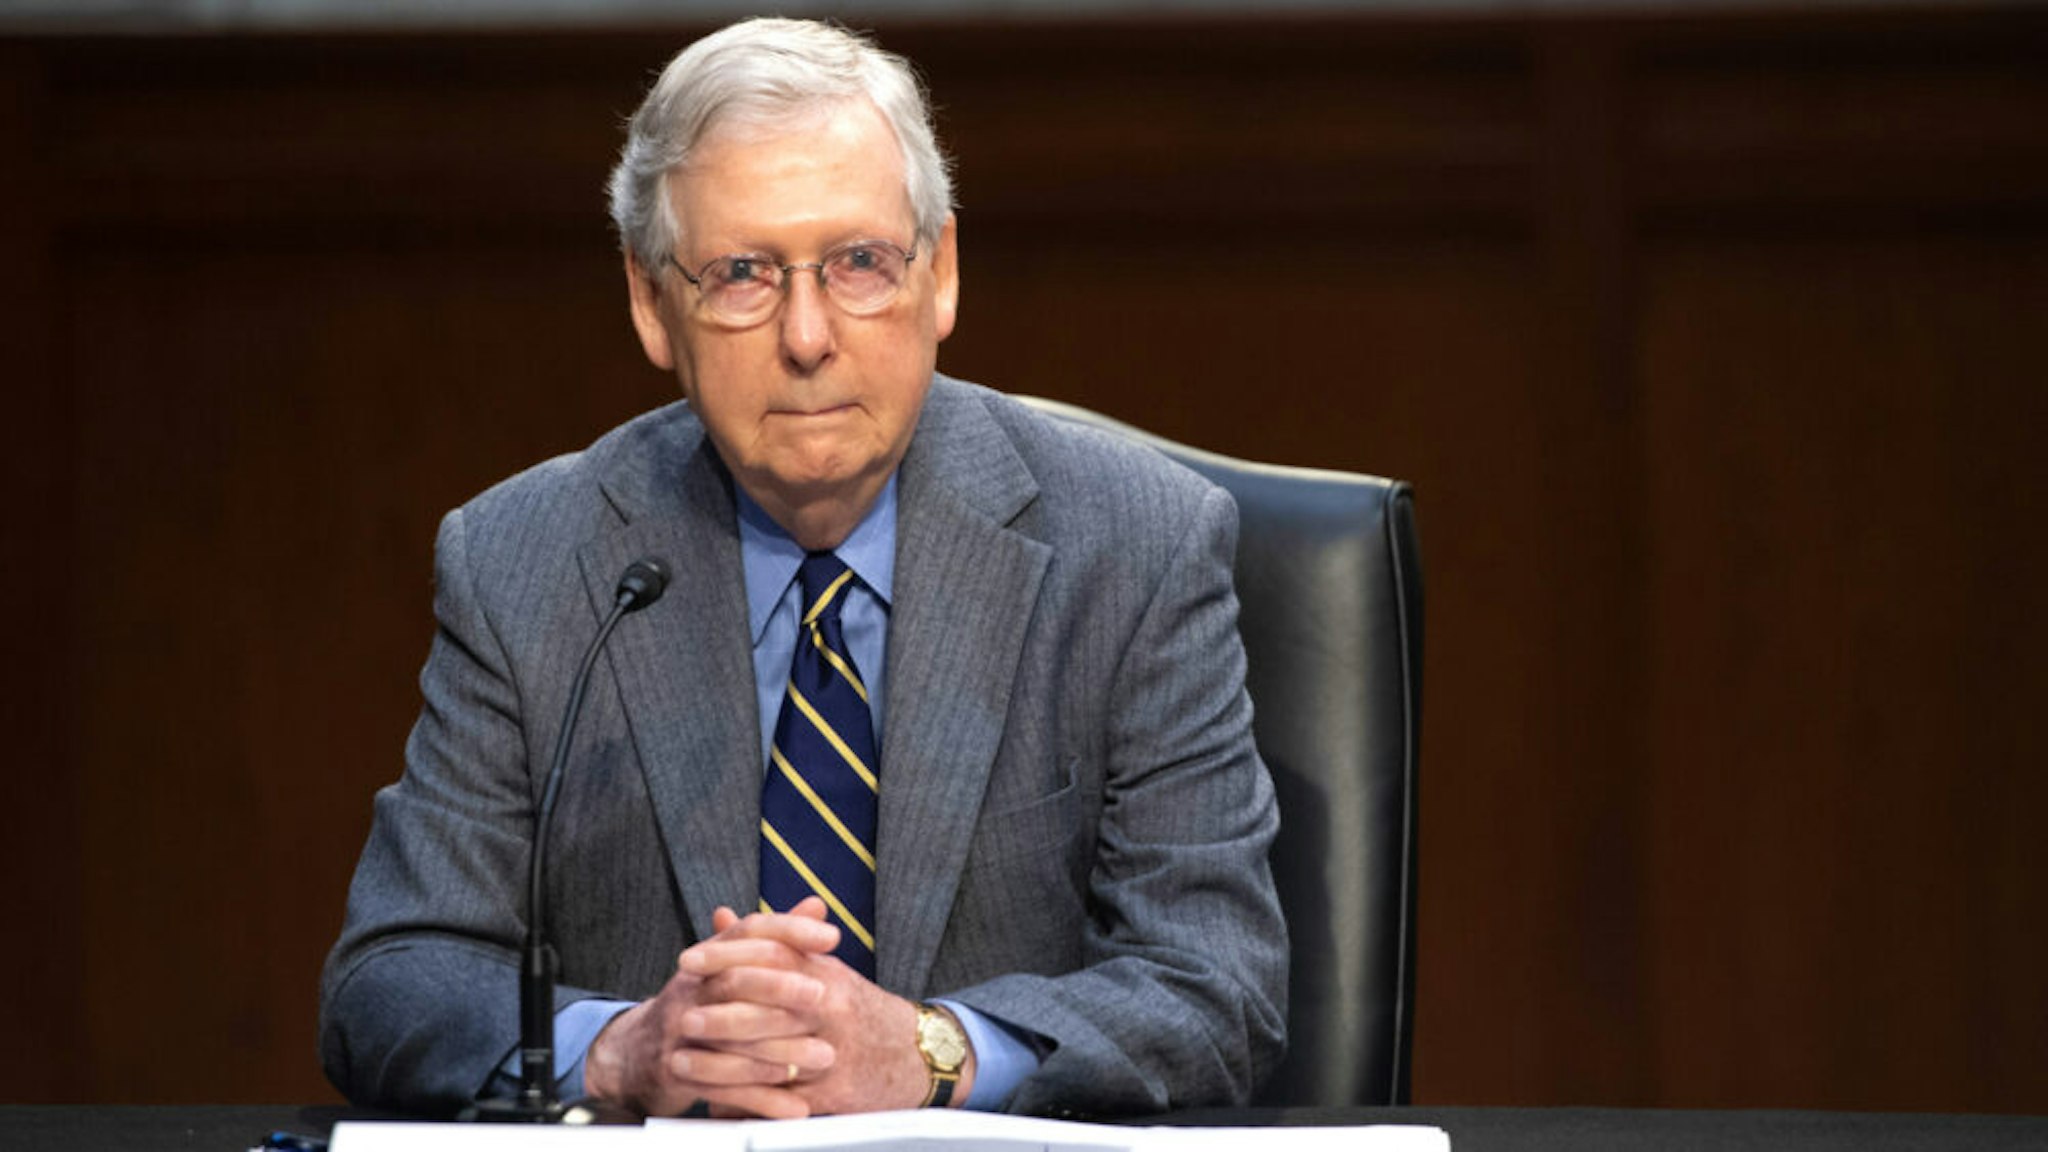 US Senate Majority Leader Mitch McConnell attends a meeting to discuss a potential economic bill in response to the coronavirus, COVID-19, in Washington, DC, on March 20, 2019. - McConnell unveiled on March 19, an economic rescue plan to send $1,200 direct checks to taxpayers, $300 billion for small businesses to keep idled workers on payroll and $208 billion in loans to airlines and other industries.